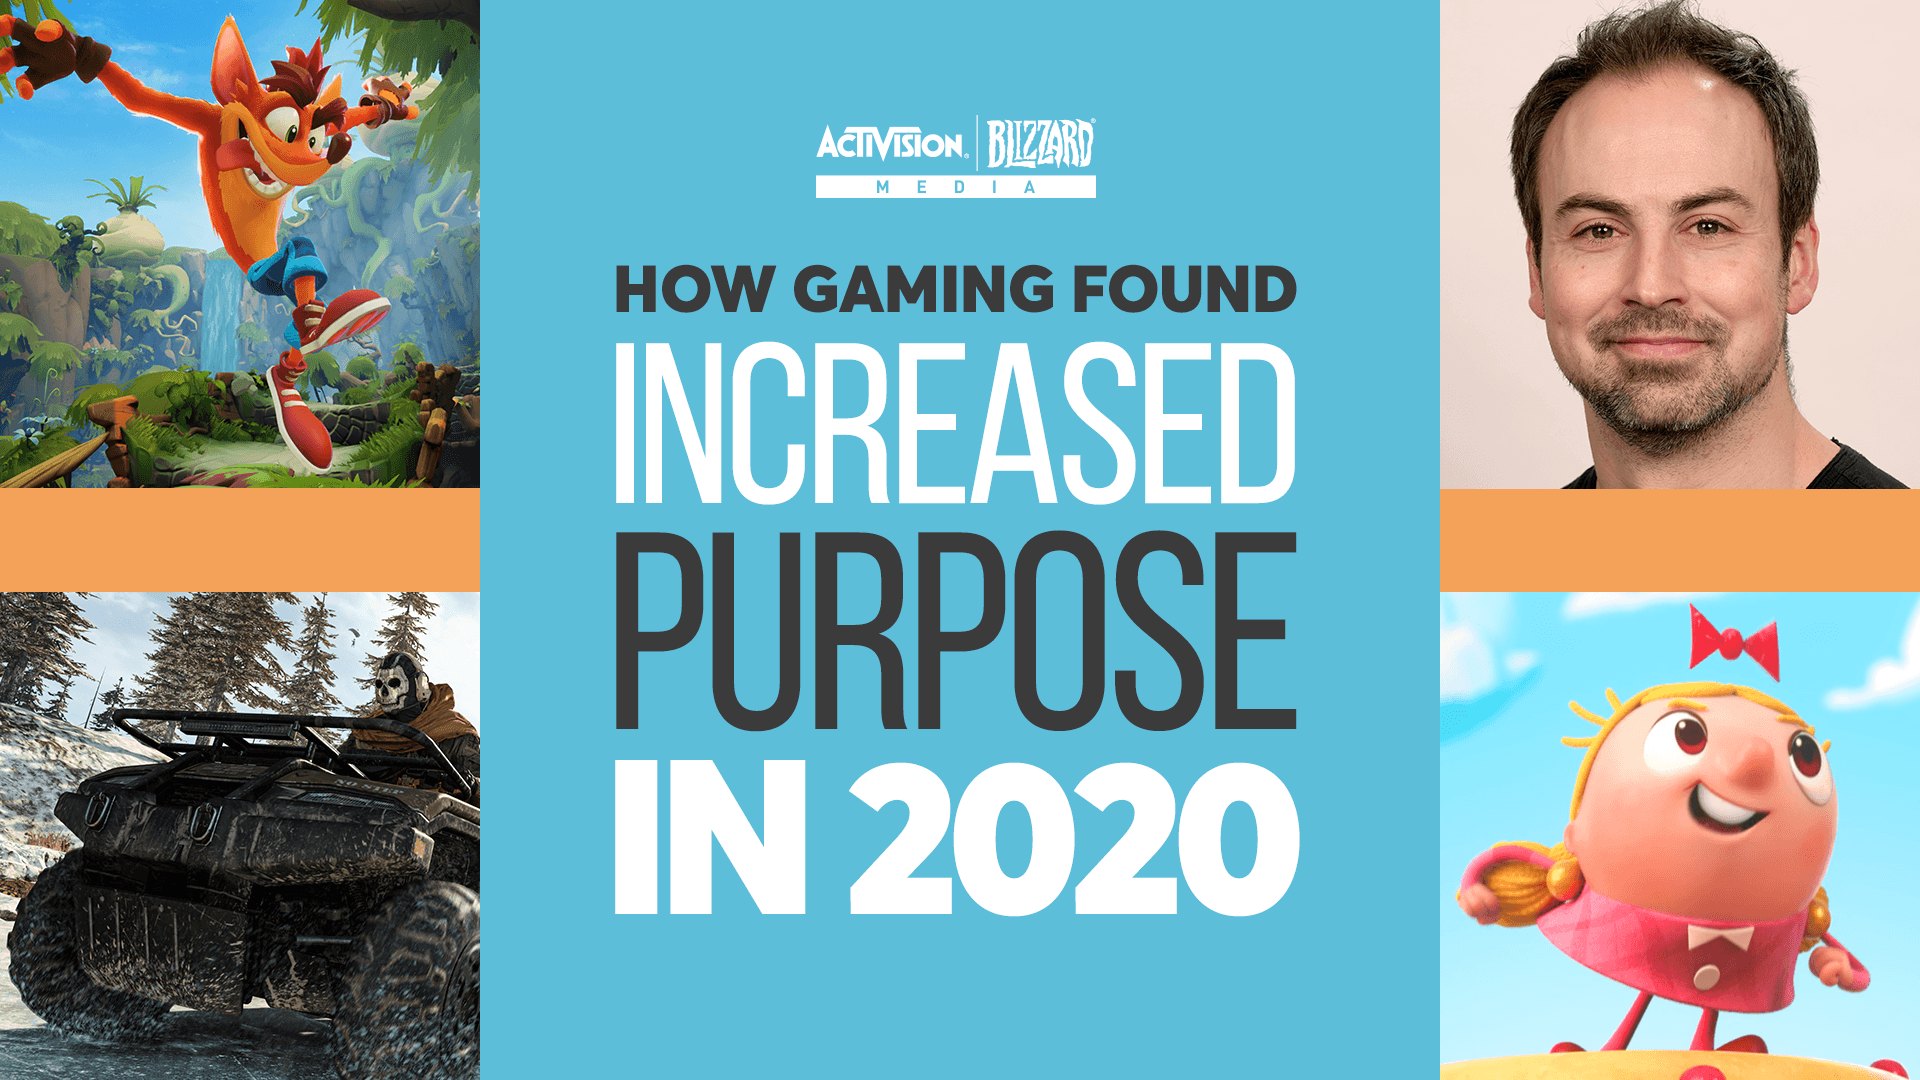 Watch video: "How gaming found increased purpose in 2020"